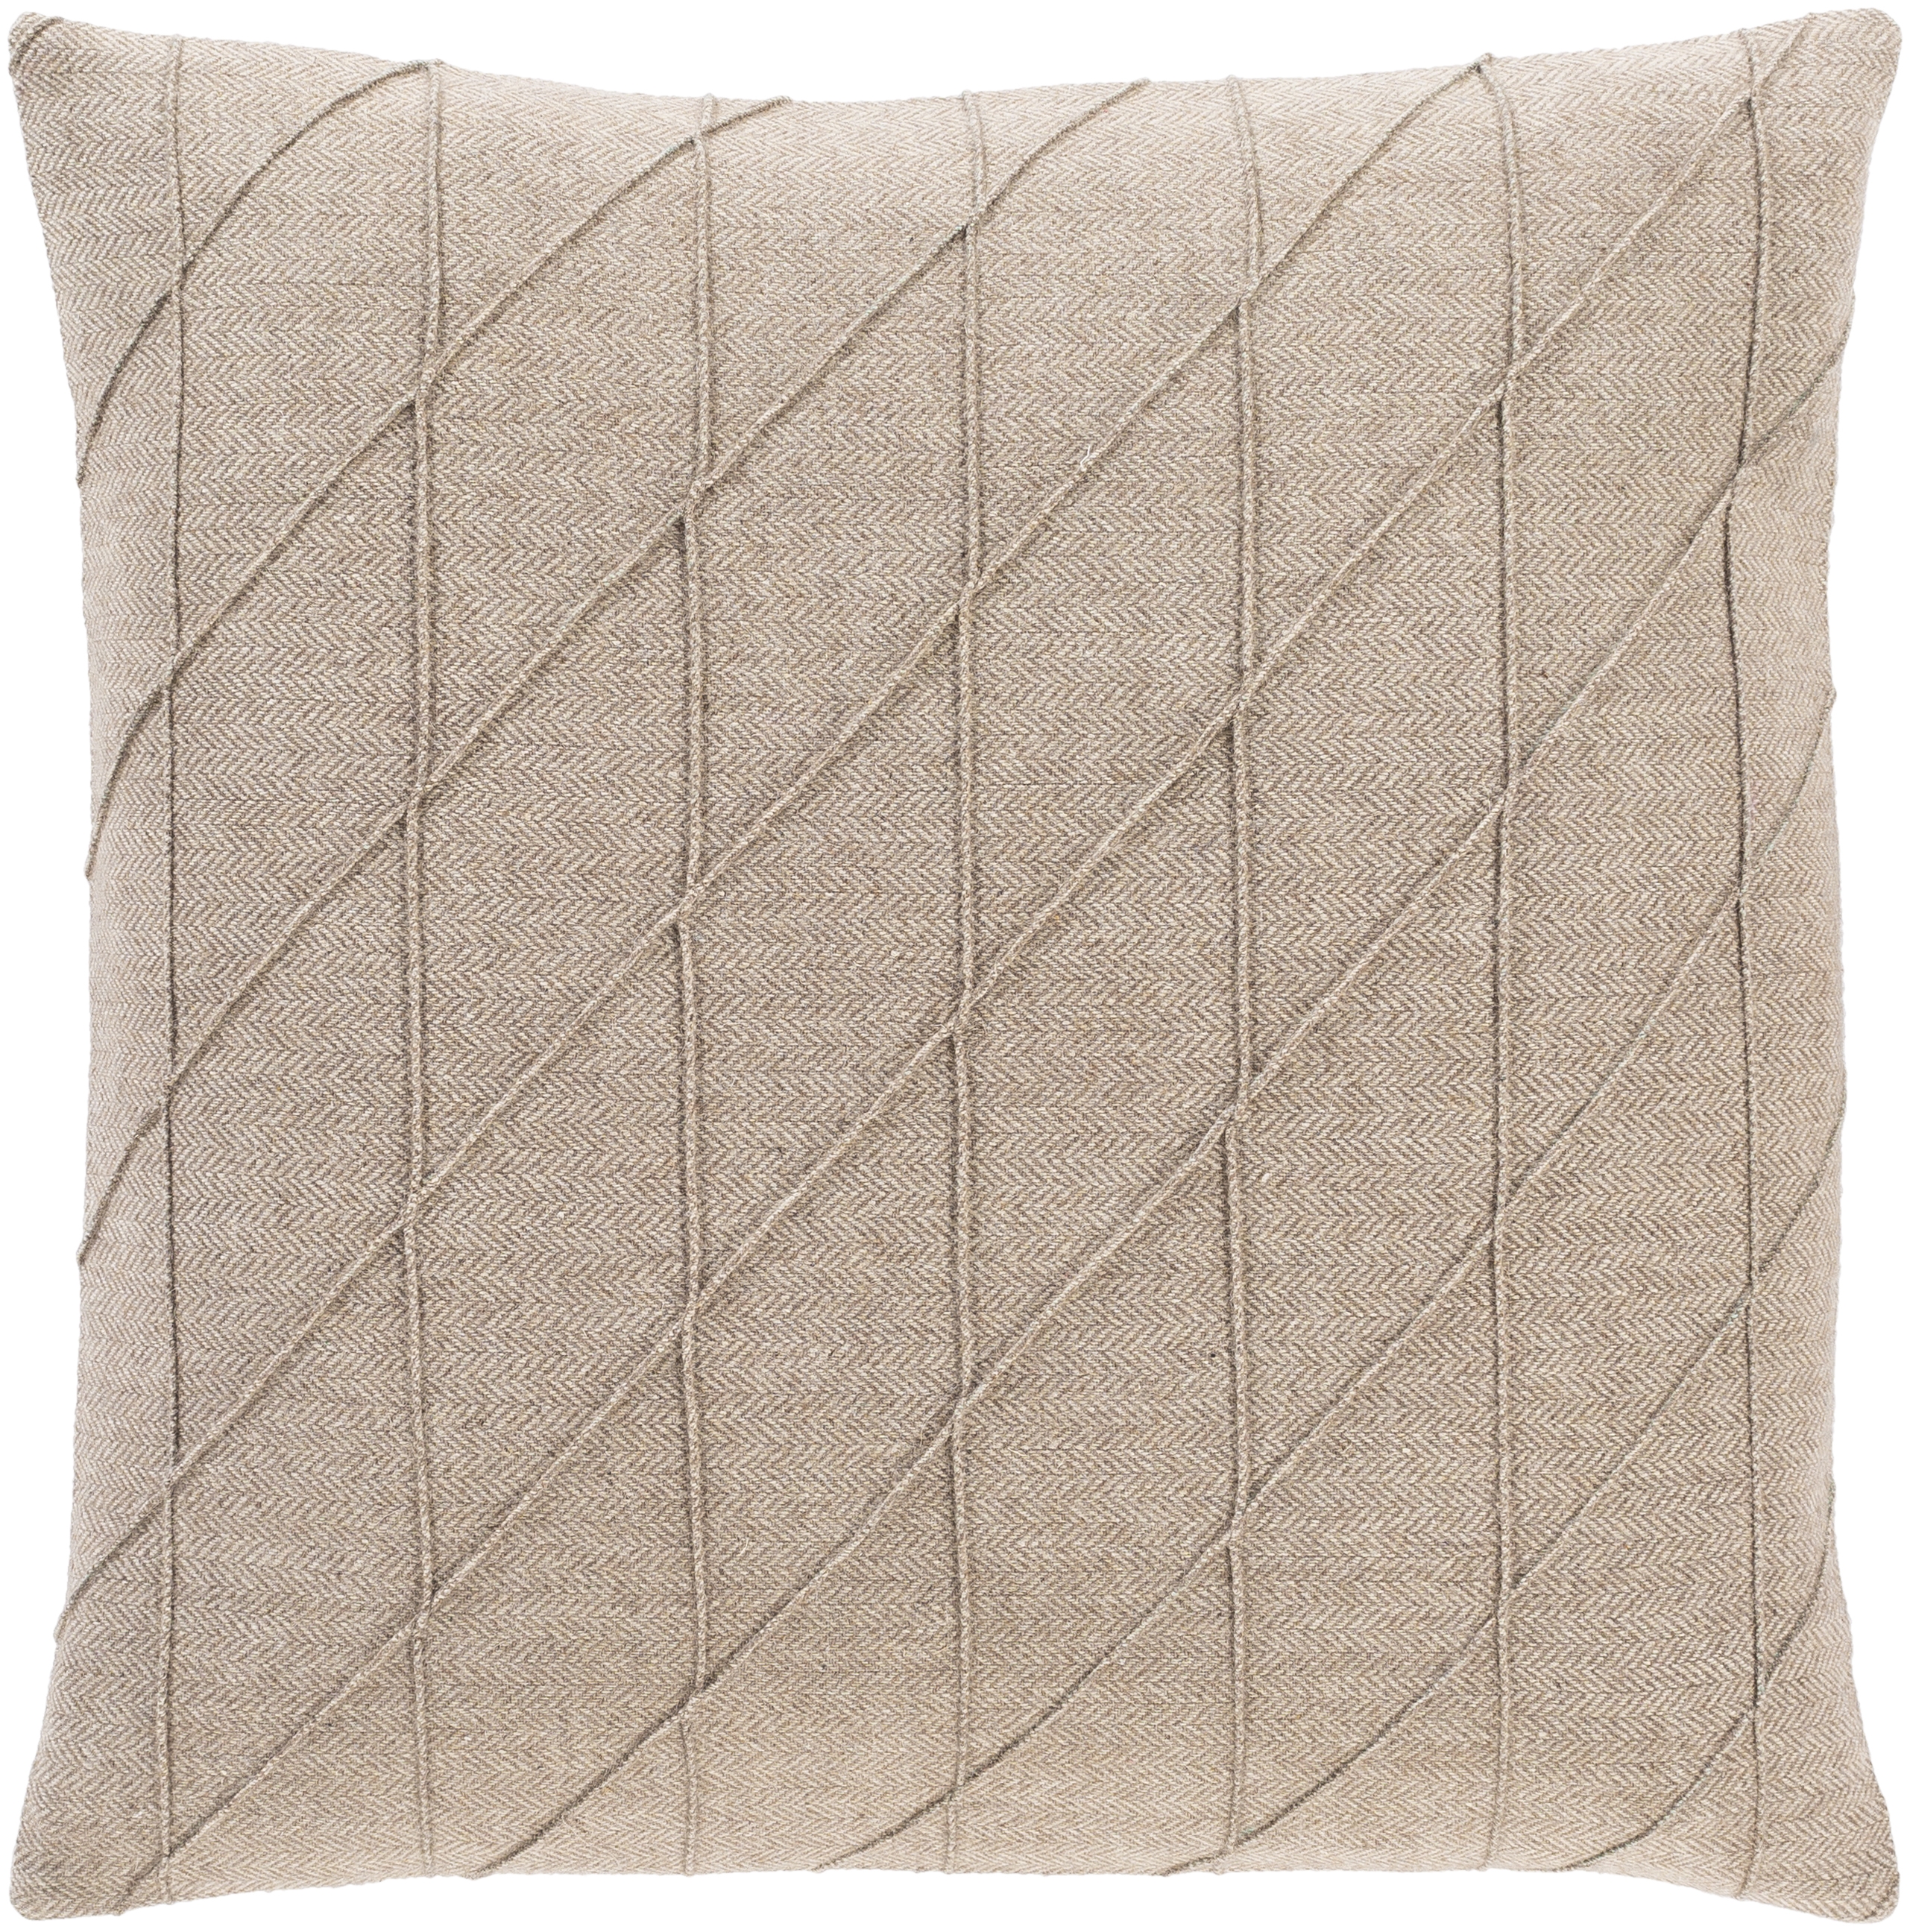 Brenley Throw Pillow, 20" x 20", with down insert - Image 0